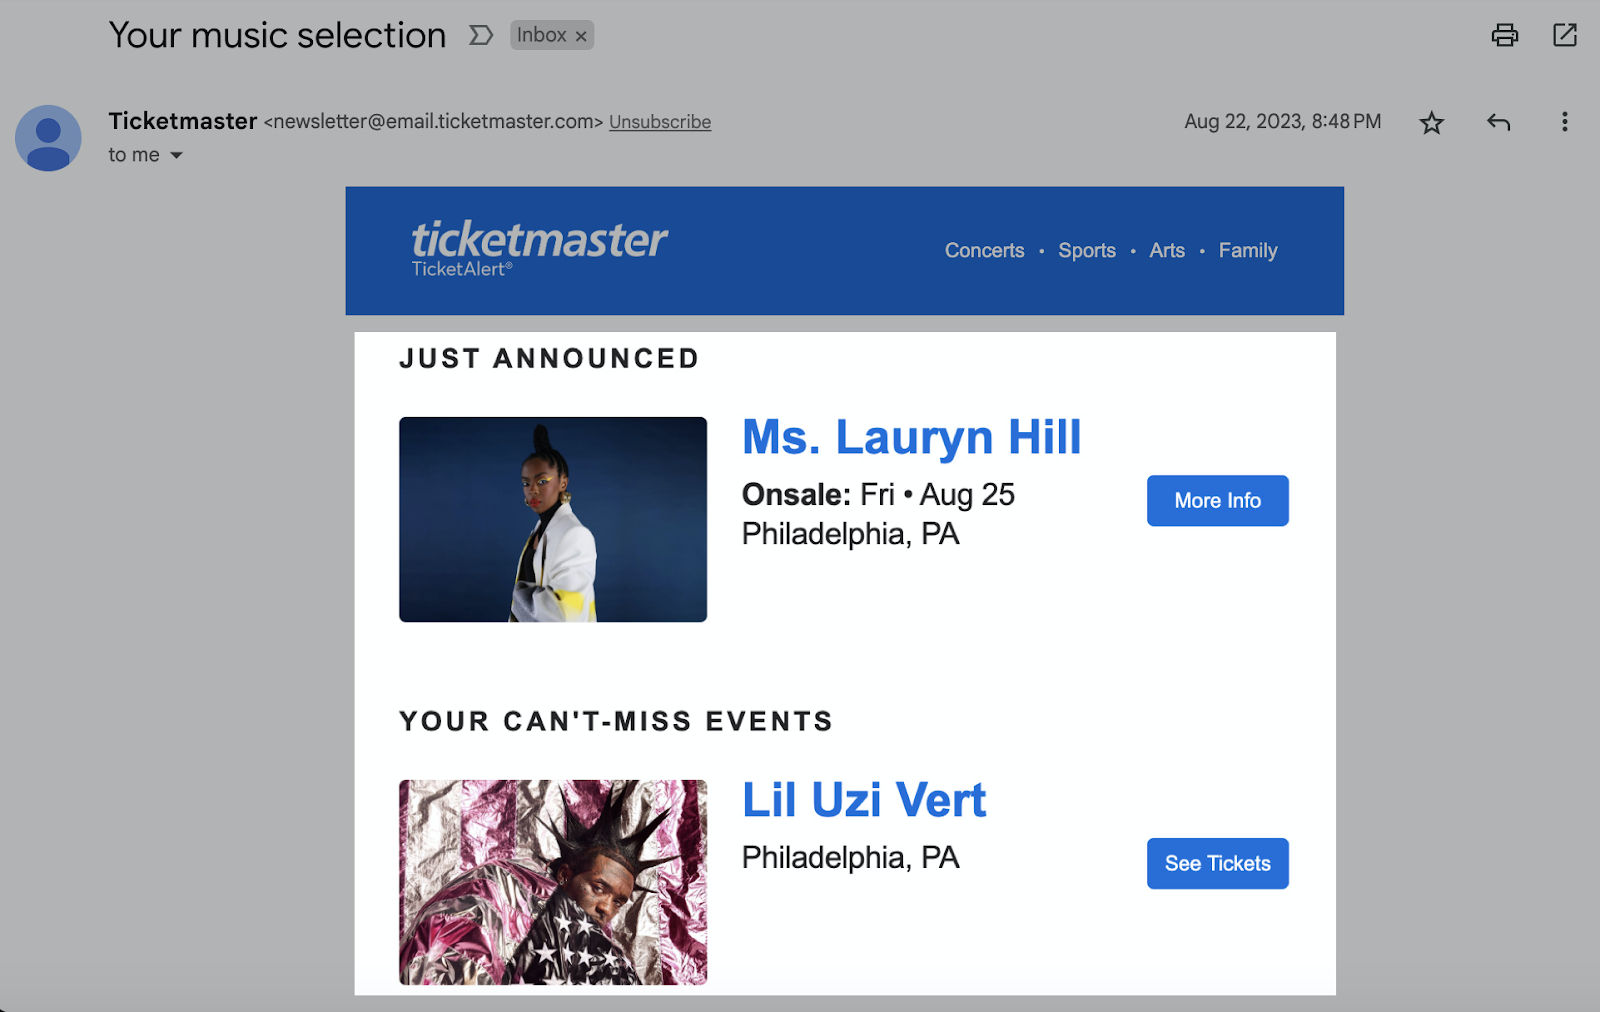 An email from Ticketmaster suggesting events to the user